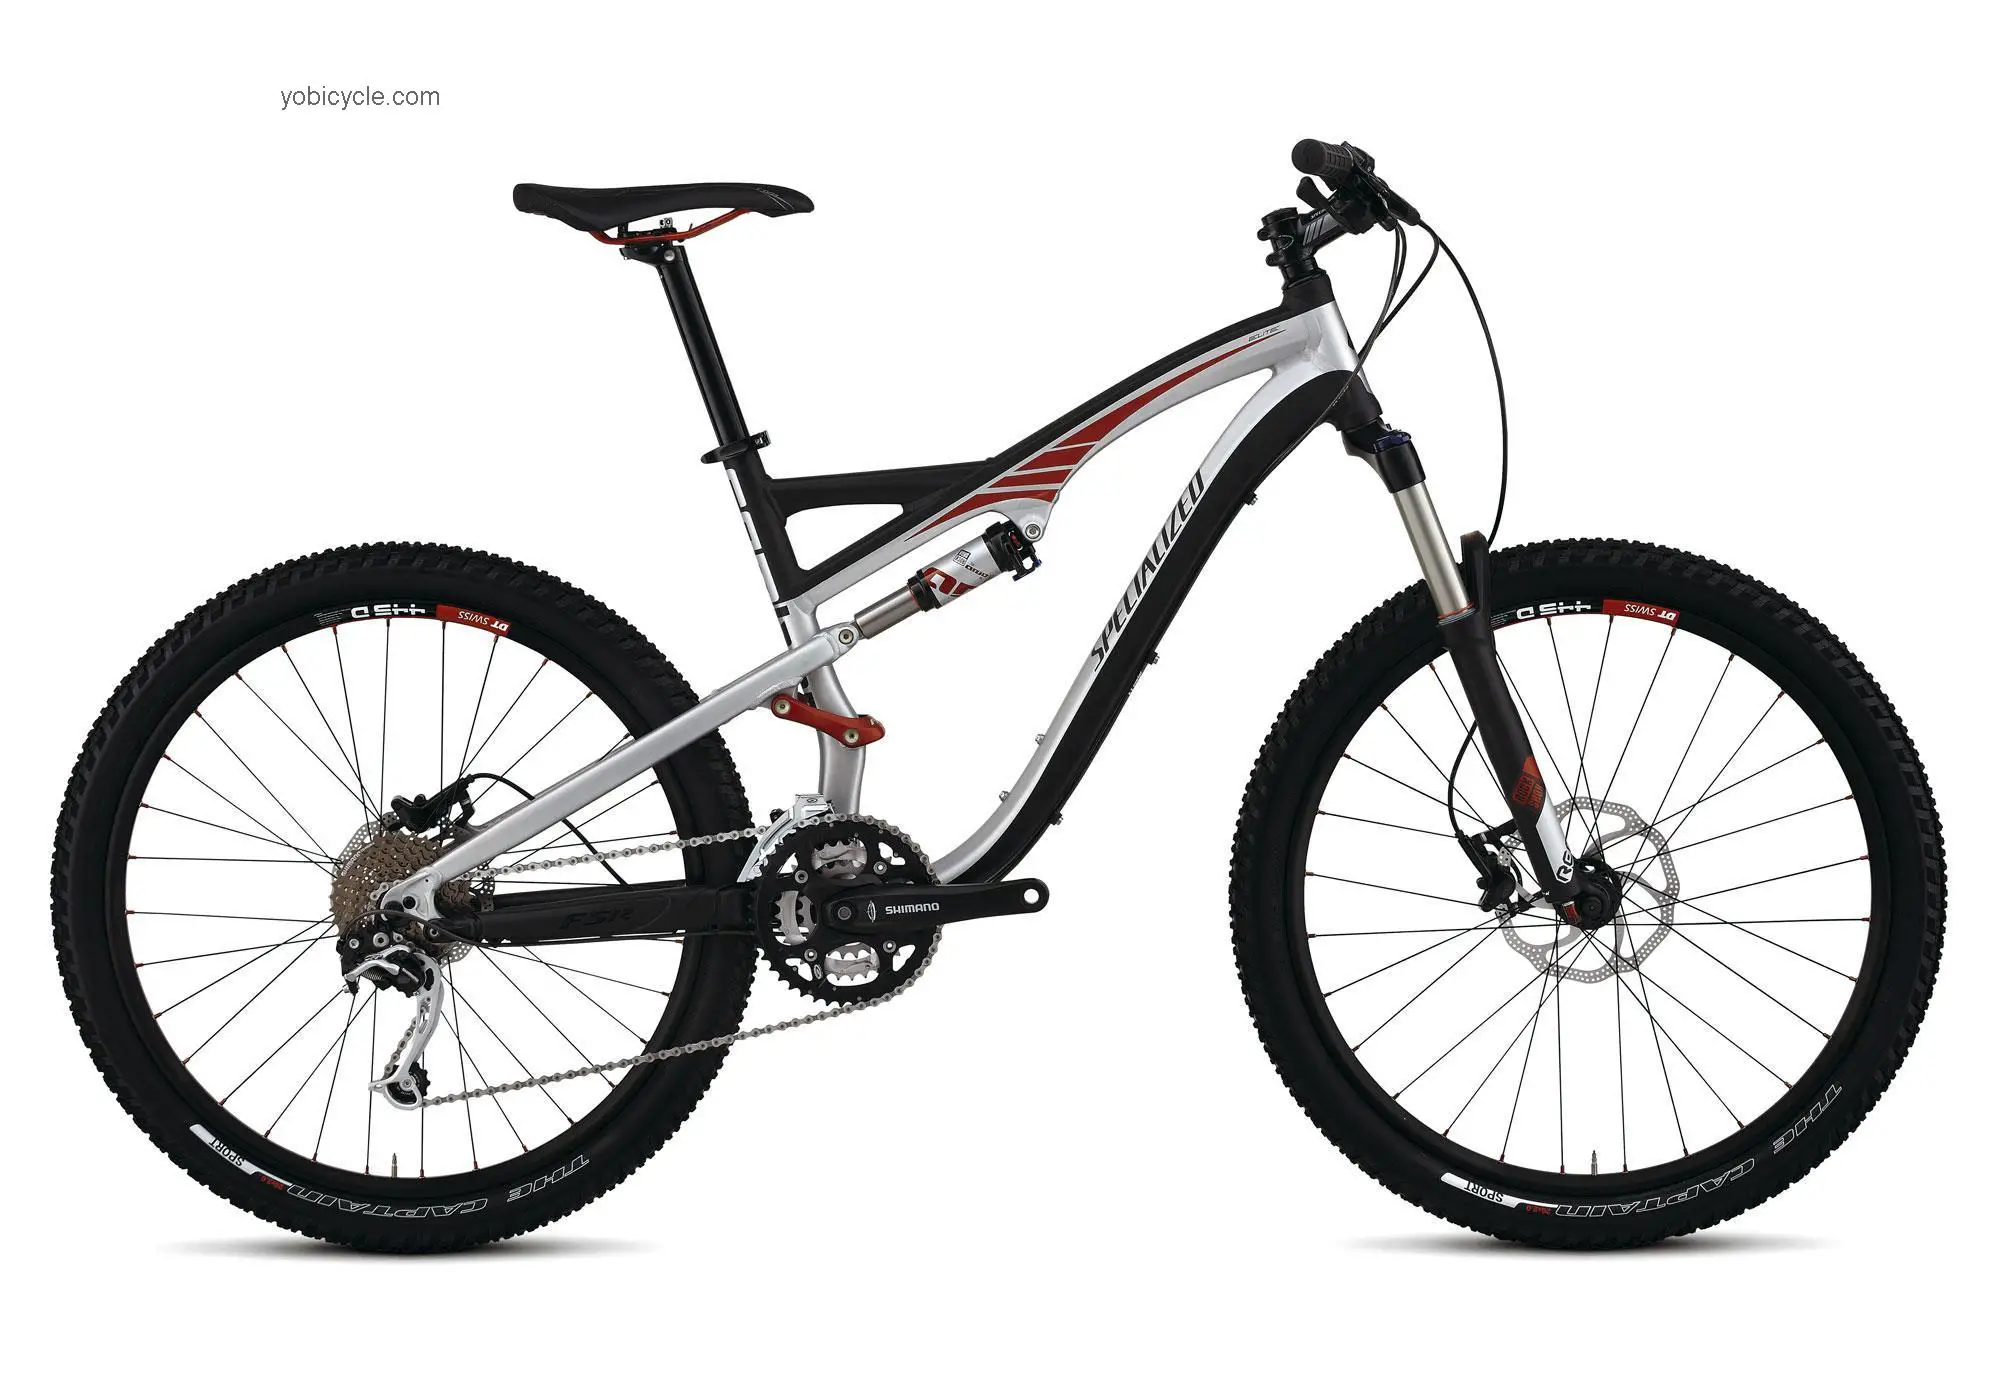 Specialized Camber FSR Elite 2012 comparison online with competitors